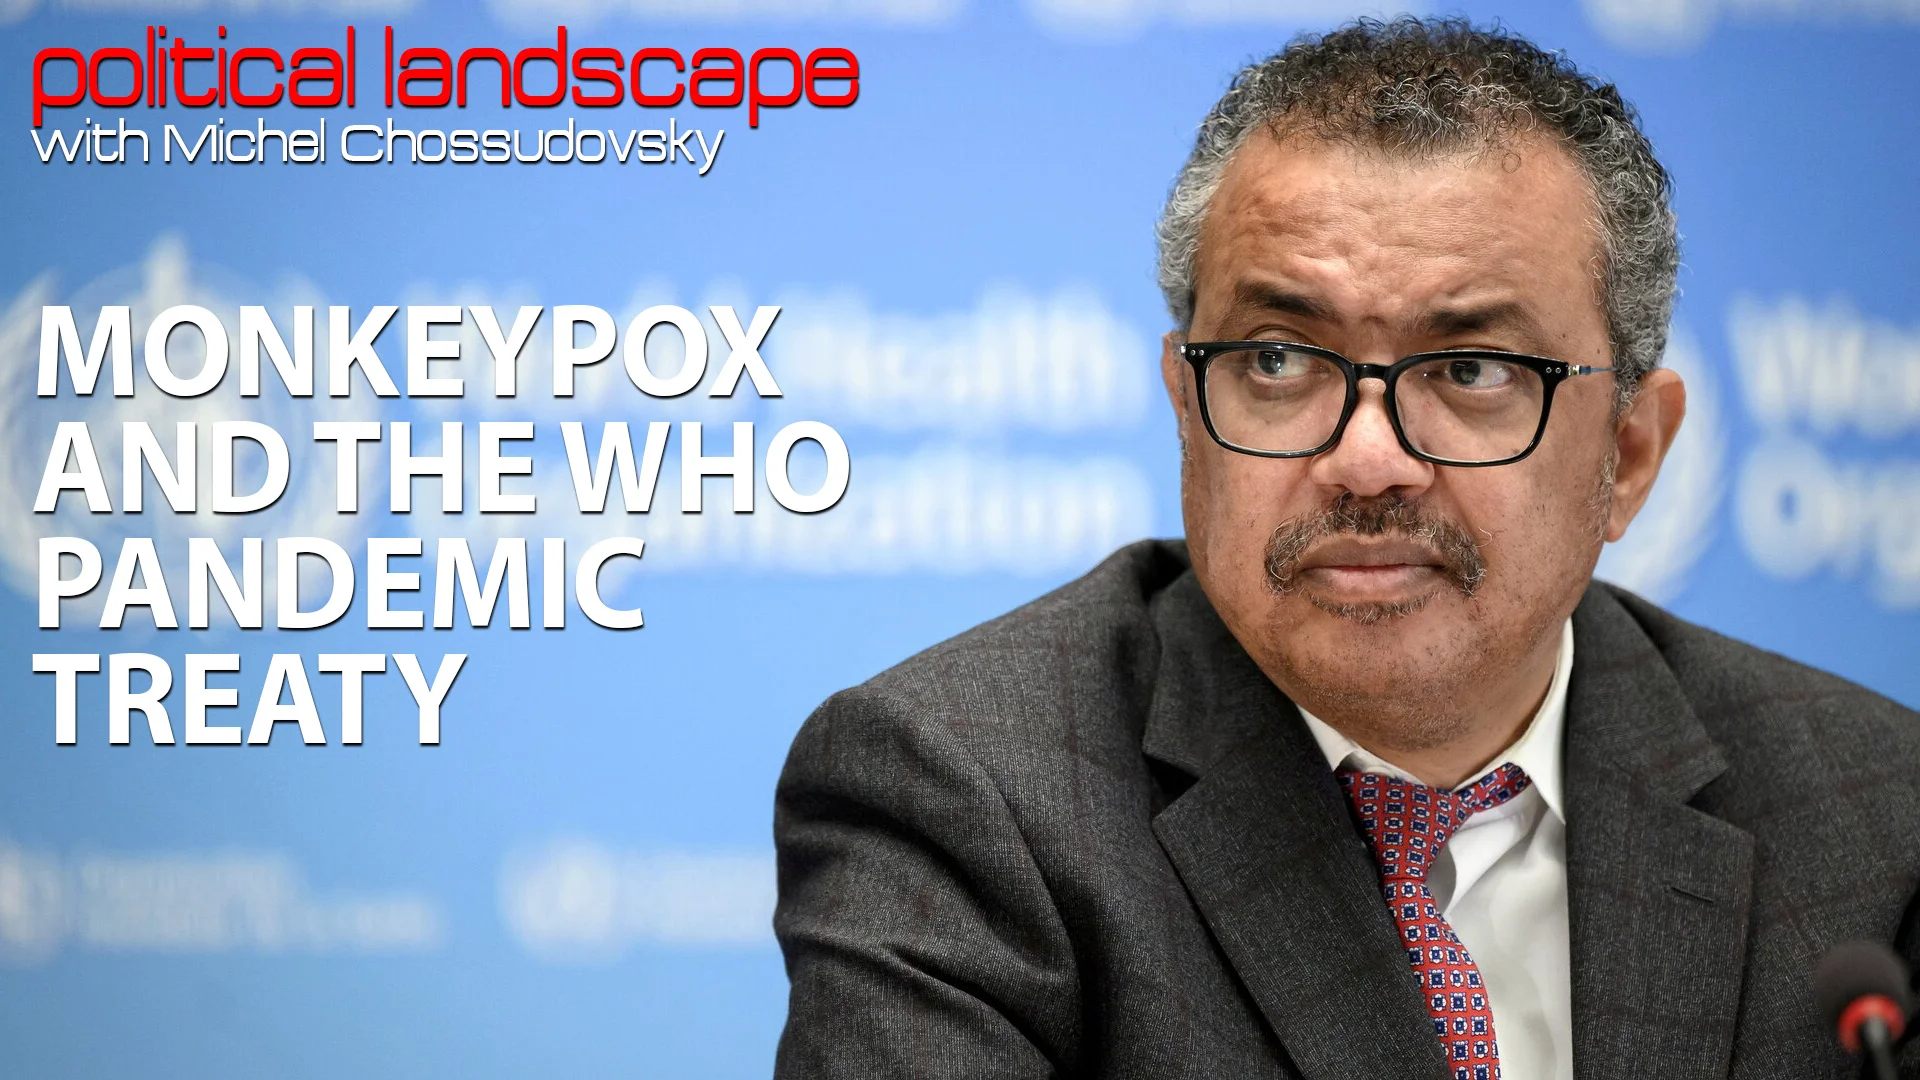 POLITICAL LANDSCAPE – MONKEYPOX AND THE WHO PANDEMIC TREATY